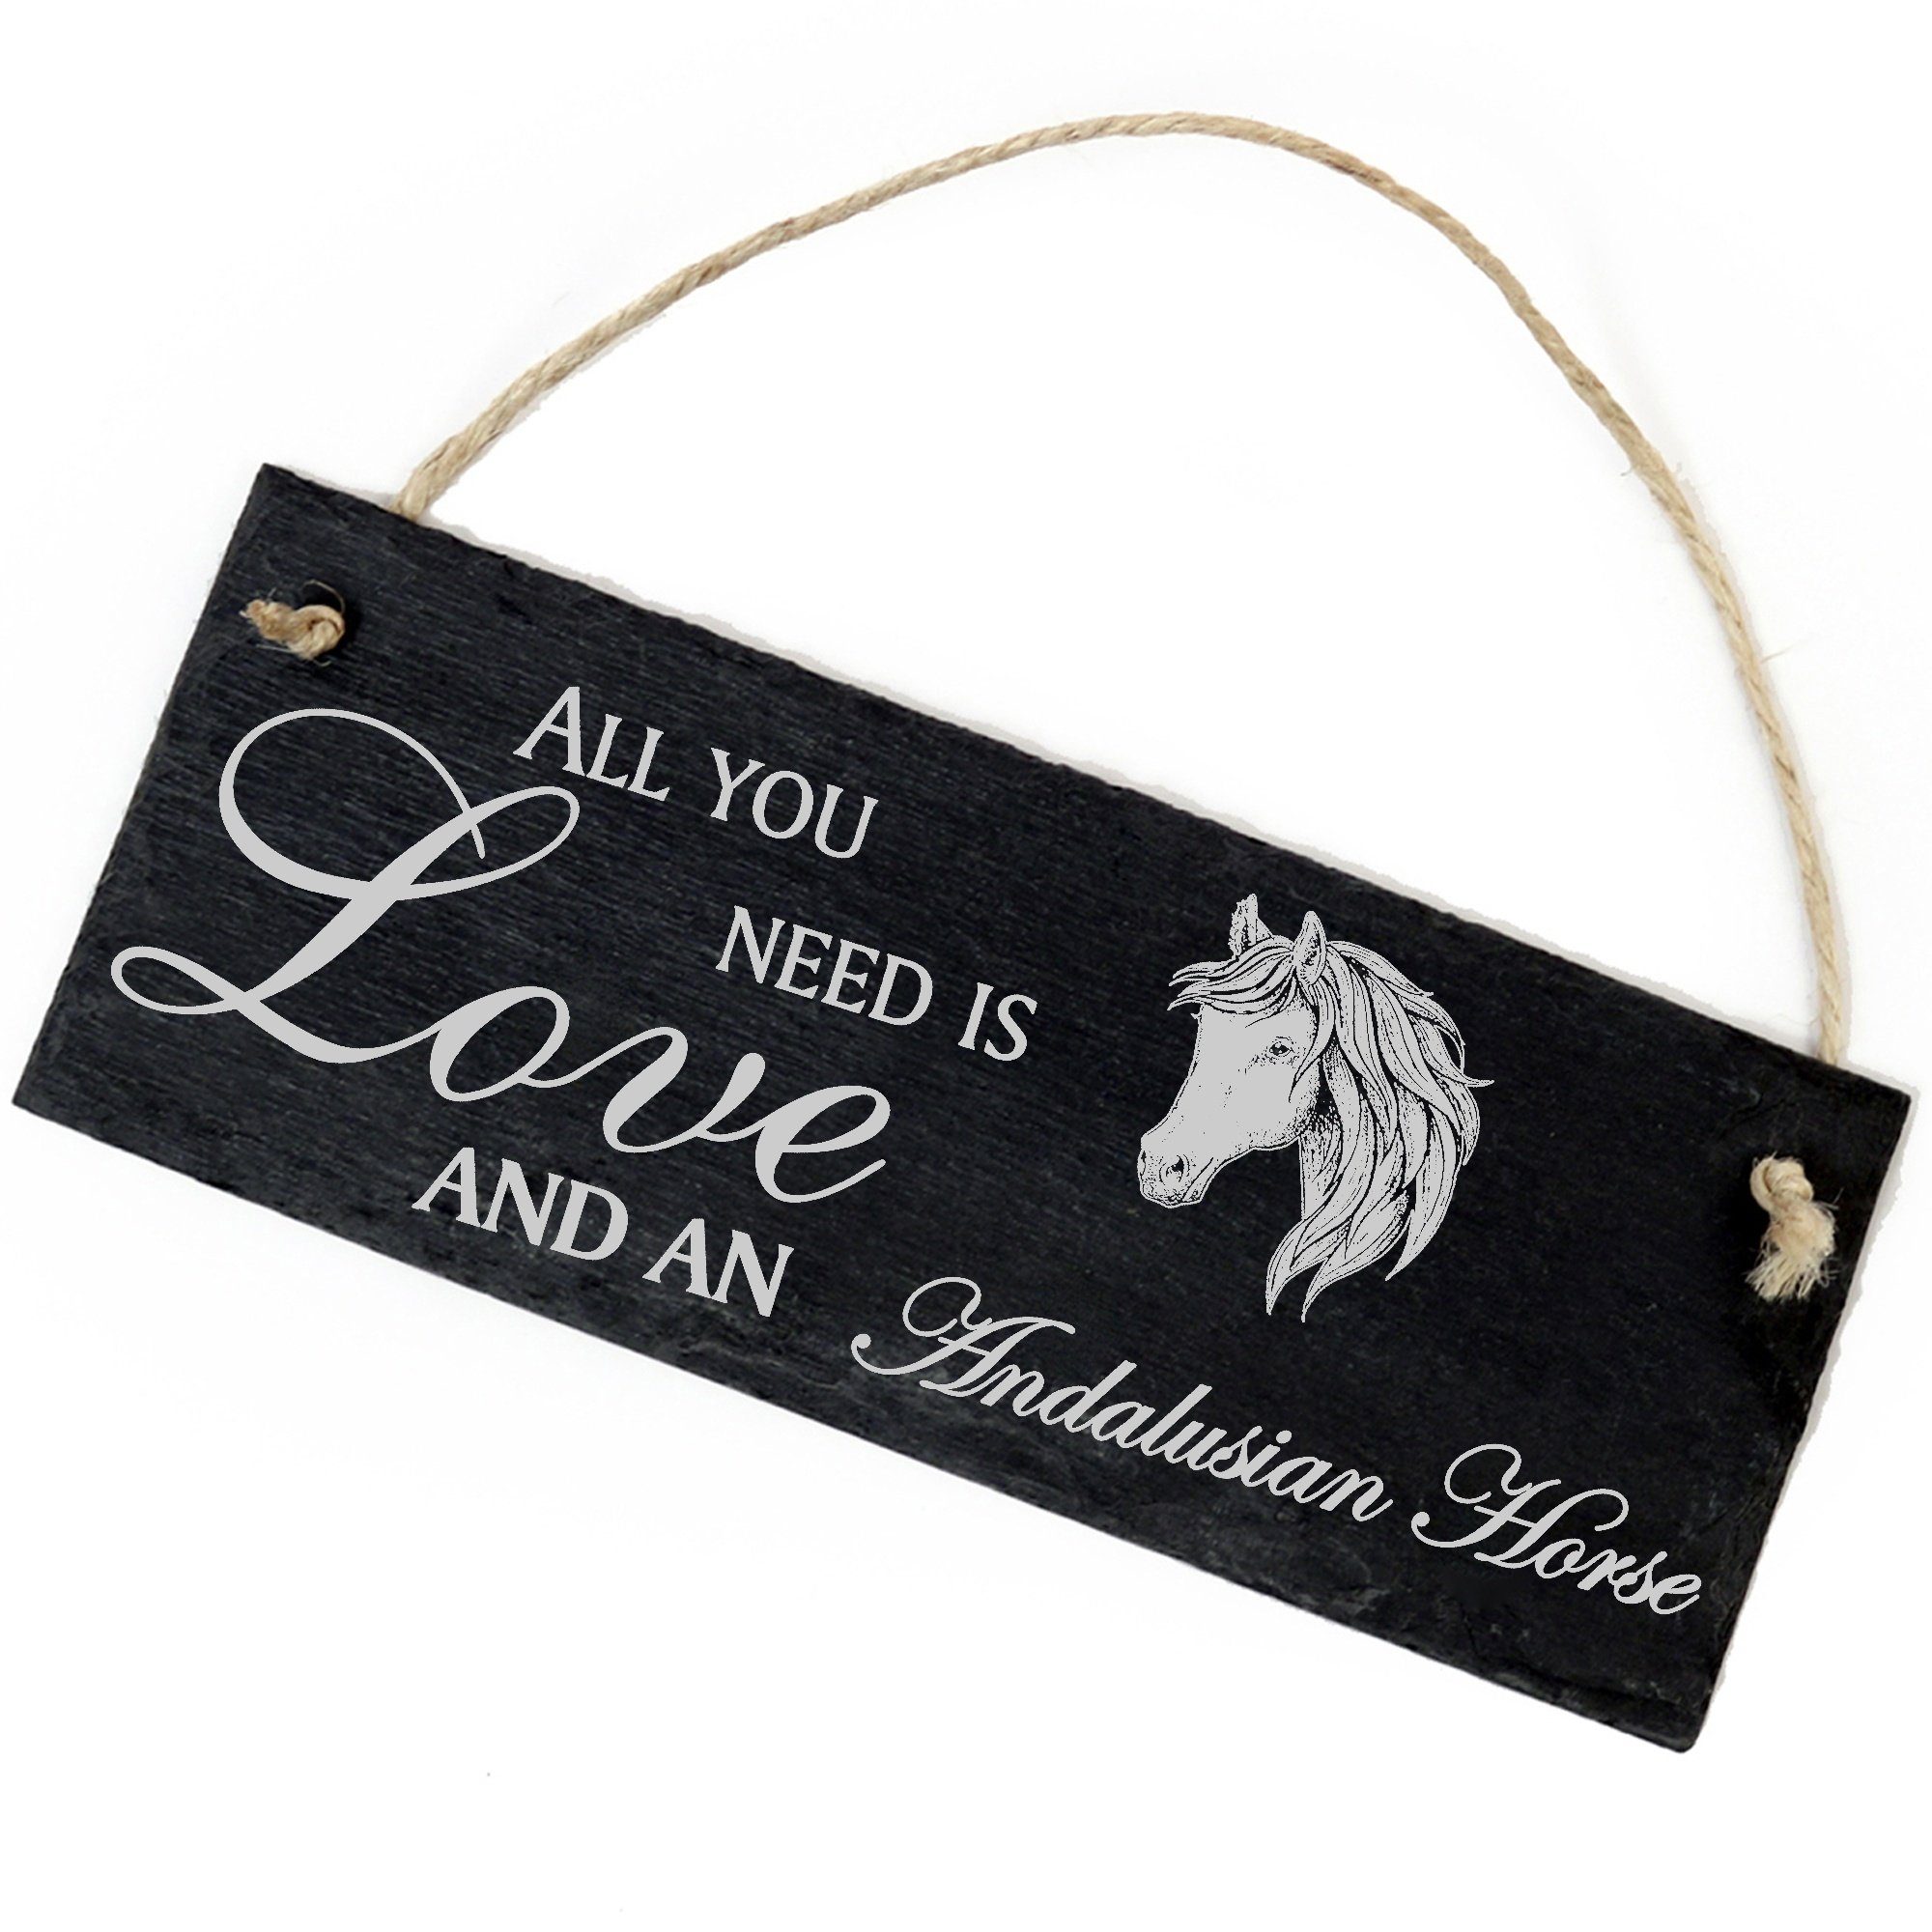 Dekolando Hängedekoration Andalusier Pferd 22x8cm All you need is Love and an Andalusian Horse